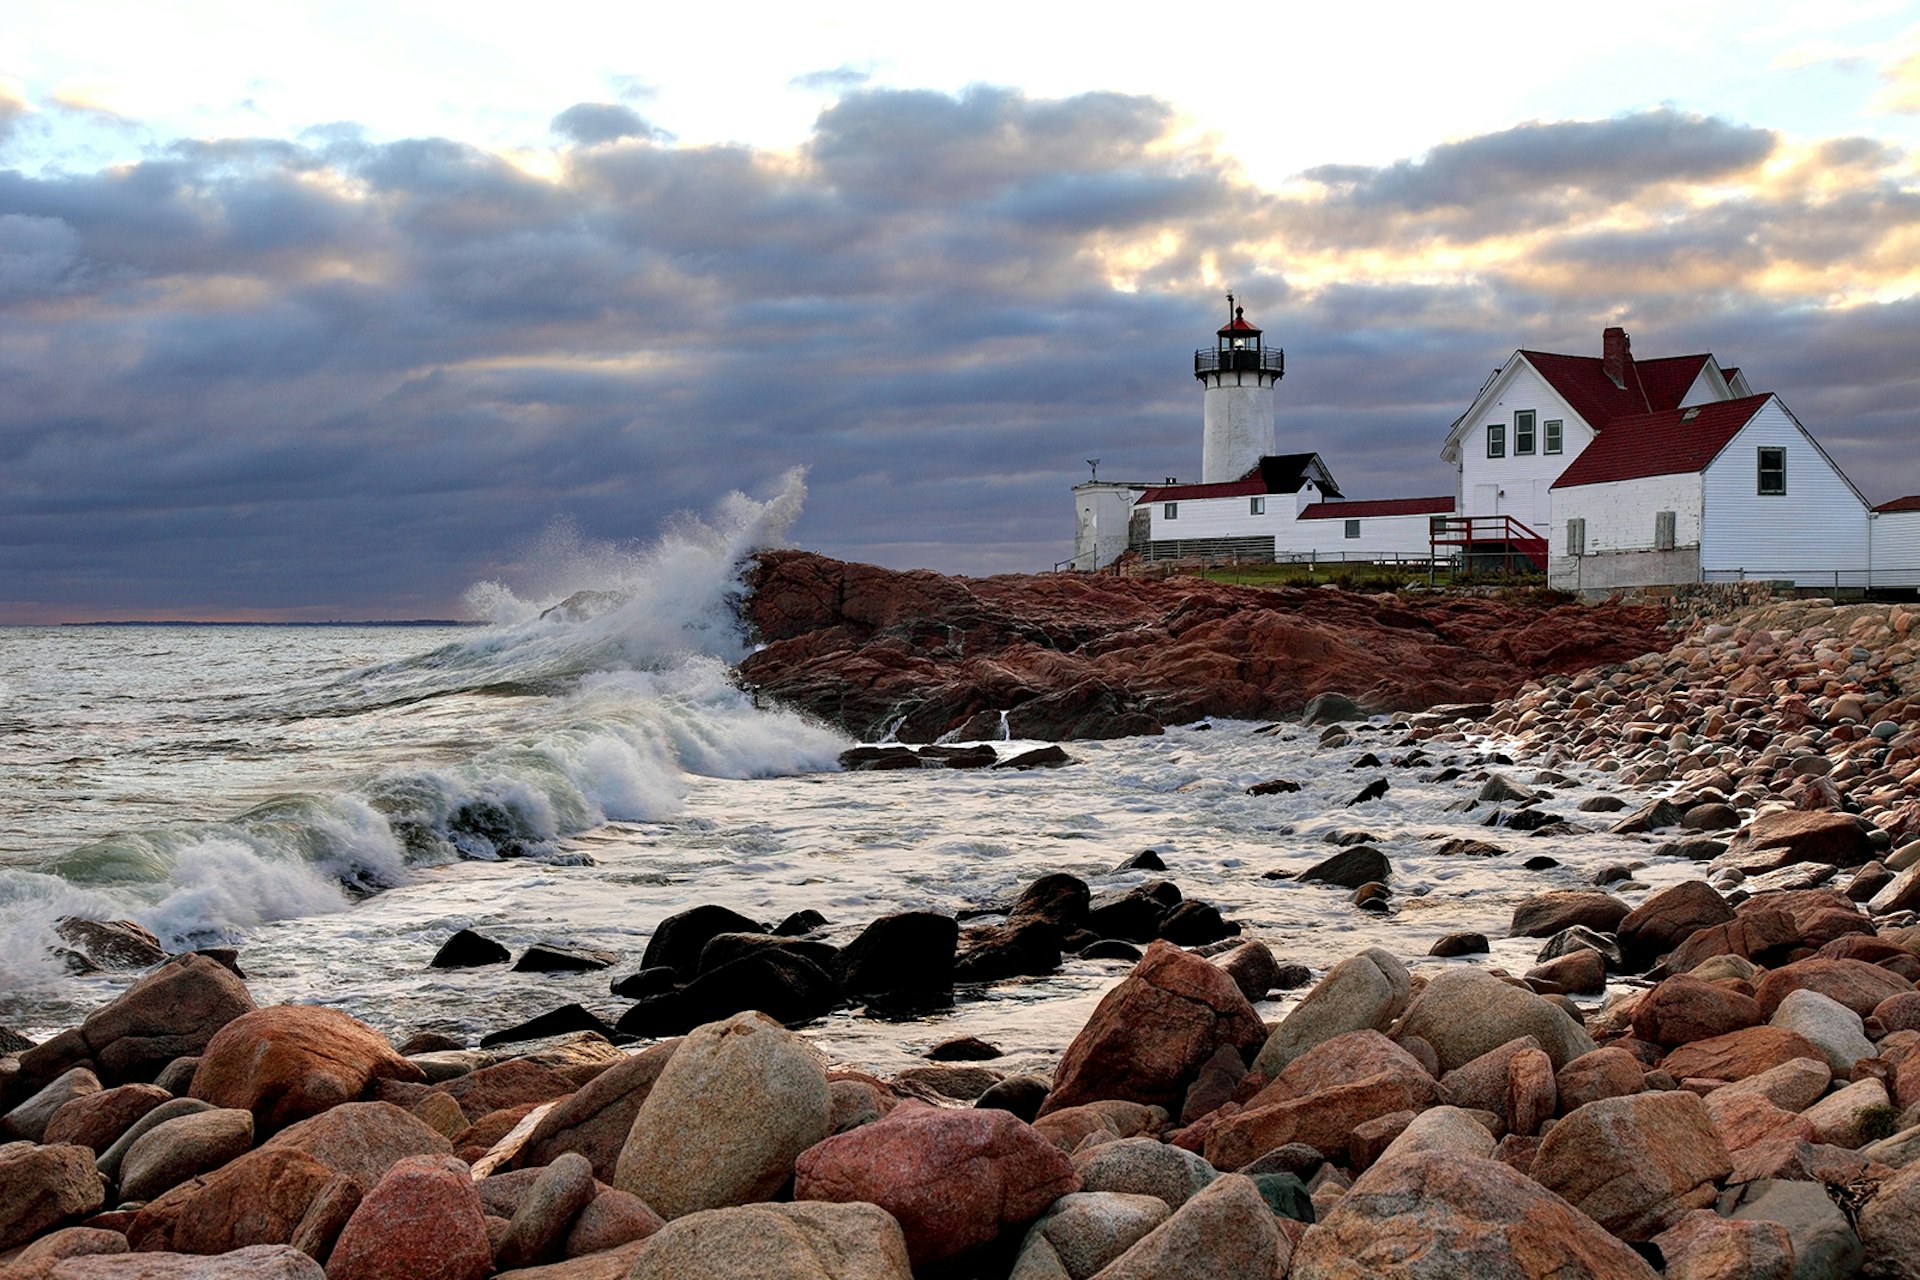 Waves crash beneath a lighthouse, with a rocky shore in the foreground